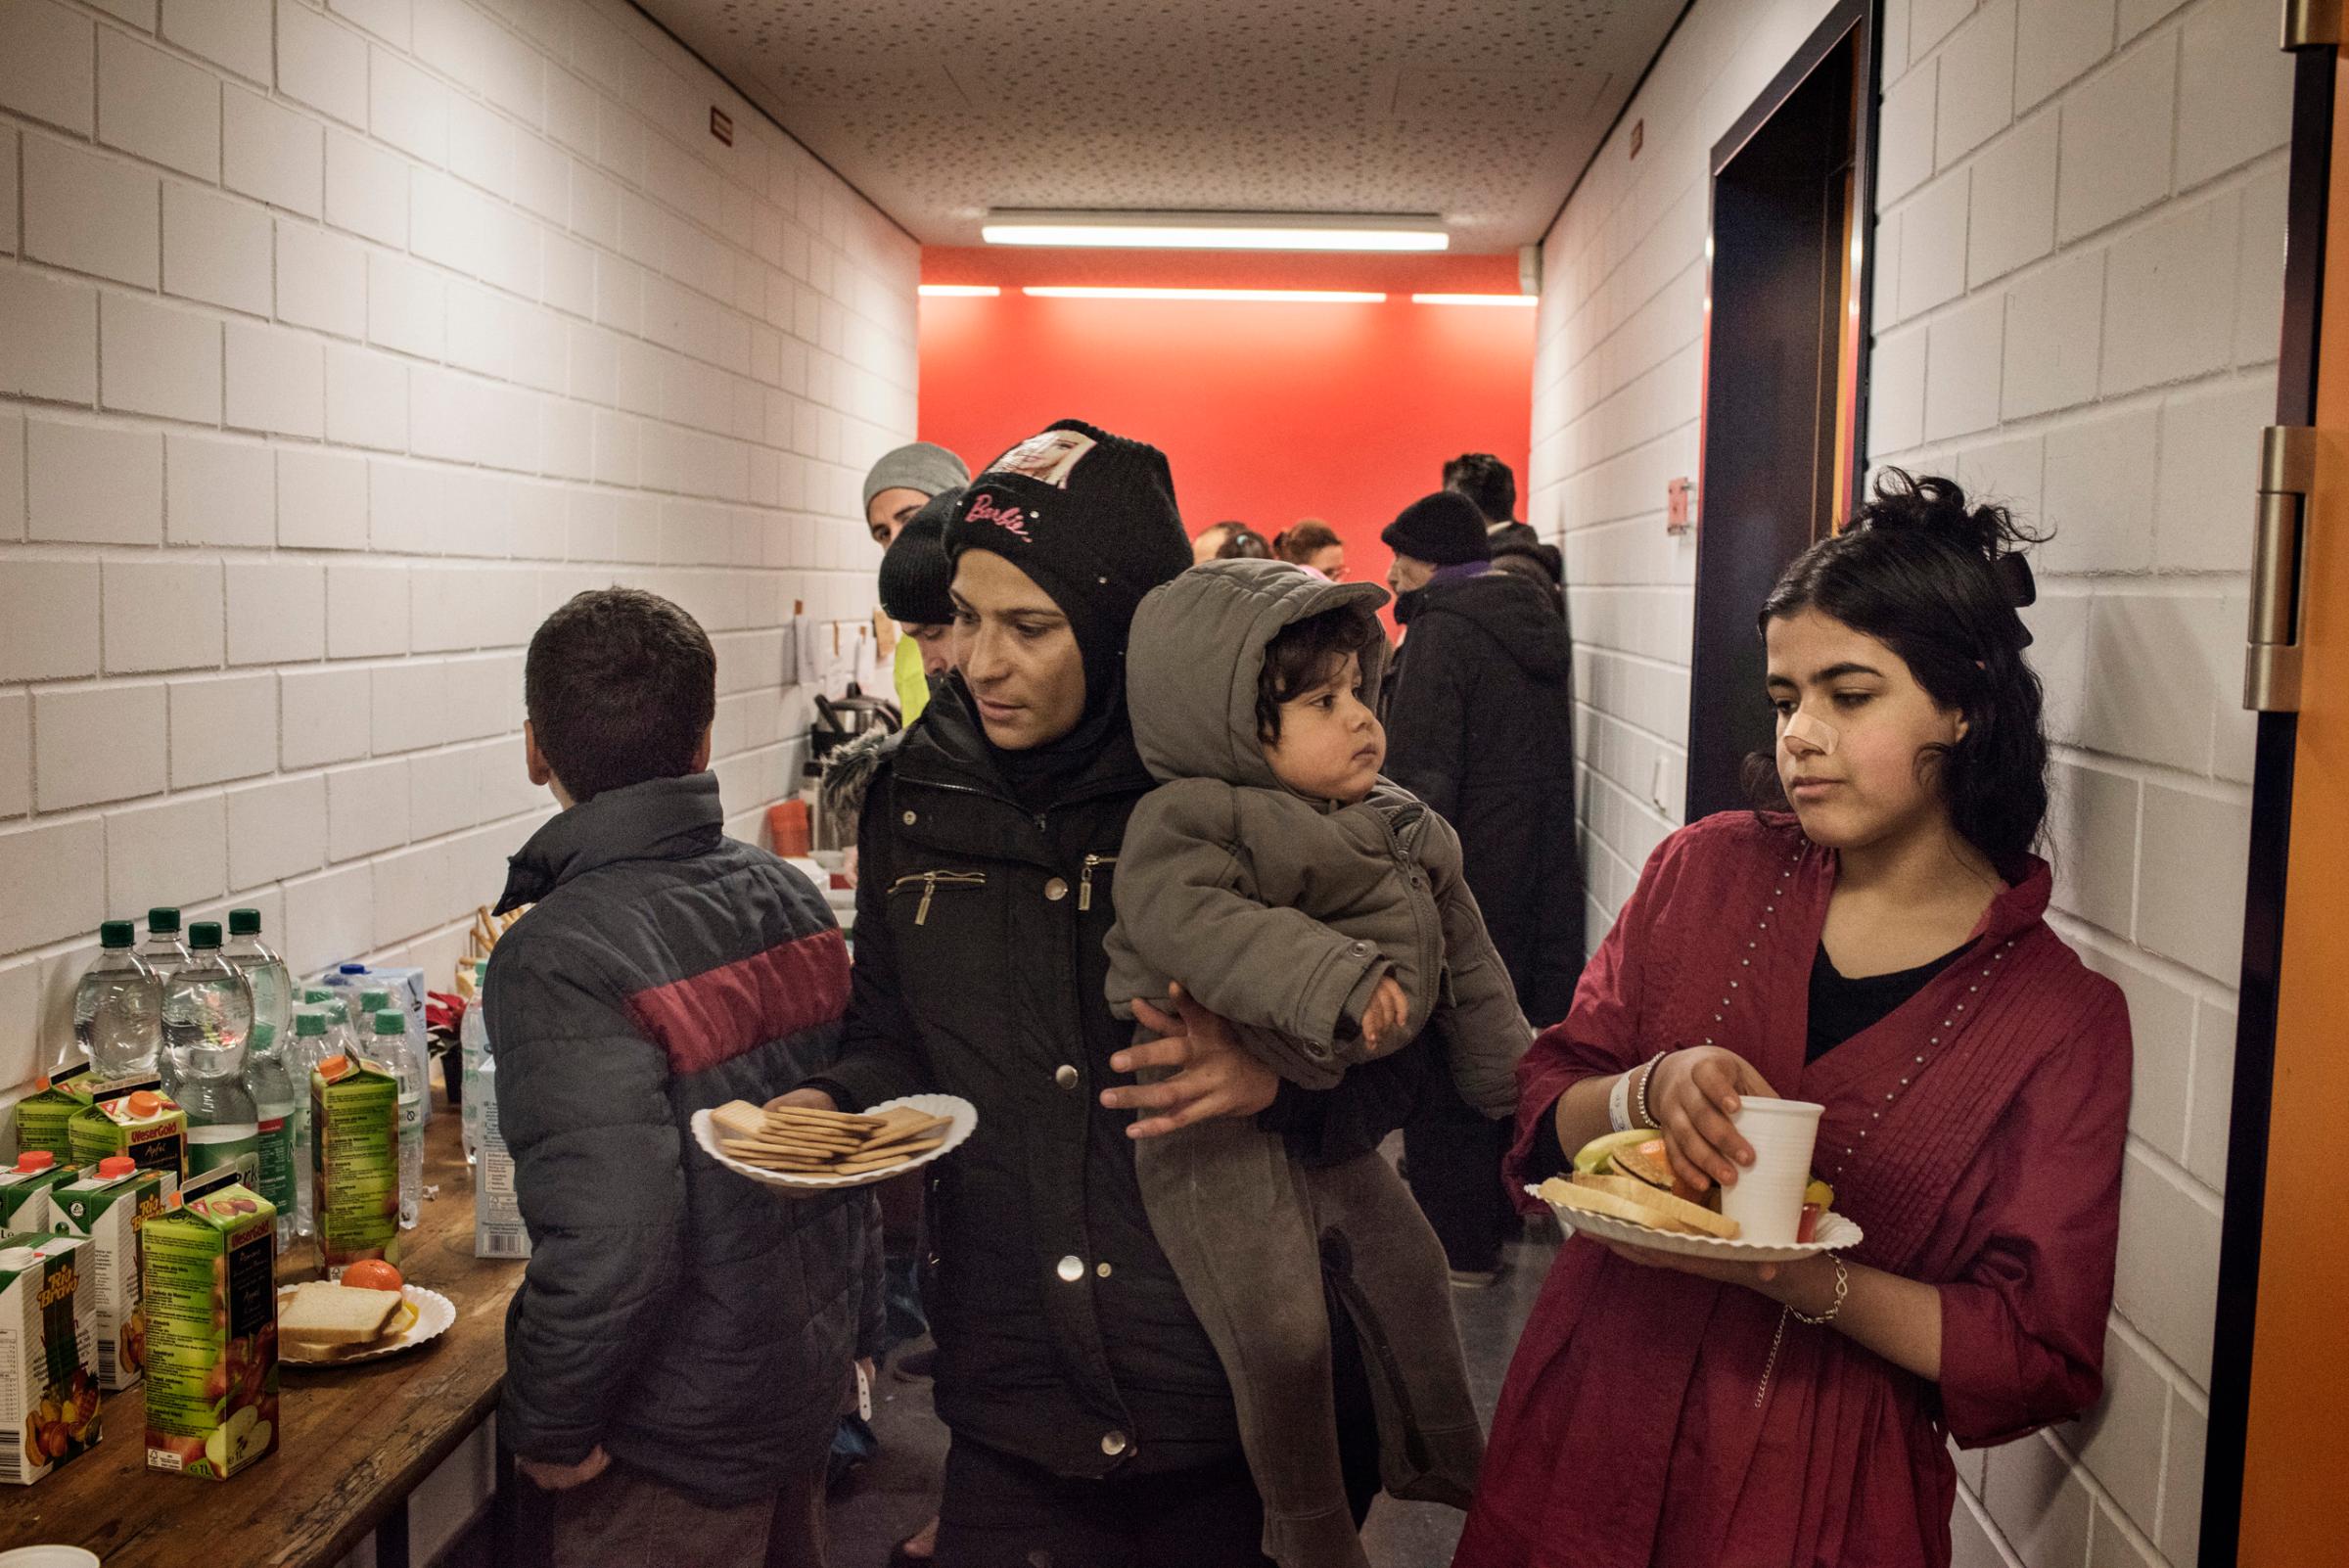 Refugees stay at the emergency shelter in a sports hall, in the districts of Prenzlauer Berg, Berlin, Germany, Dec. 2015.